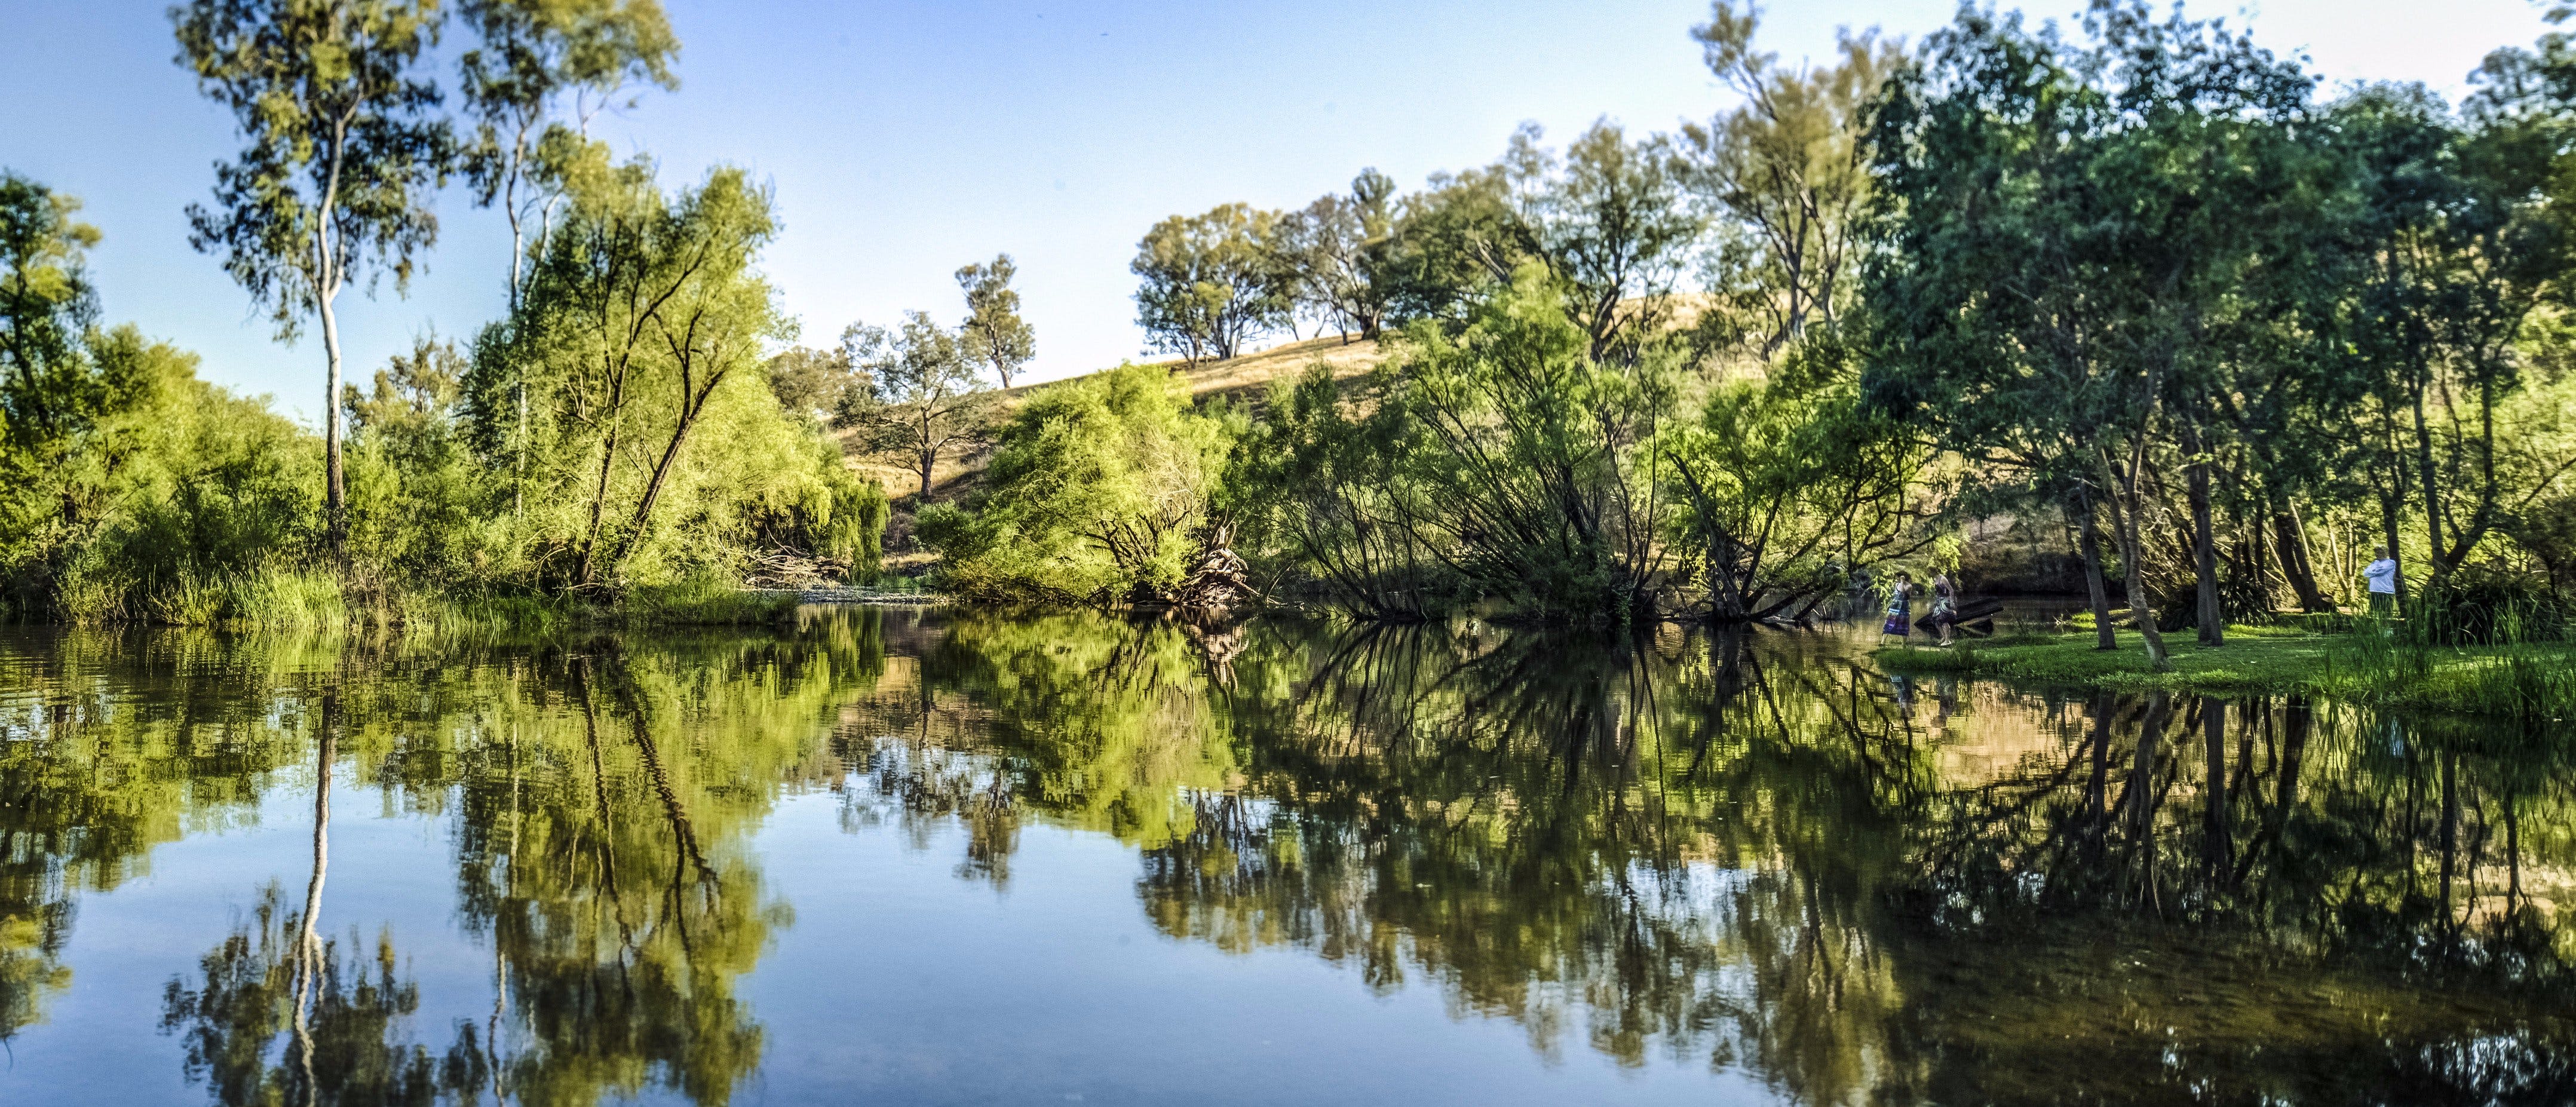 Tumut River Walk - Find Attractions